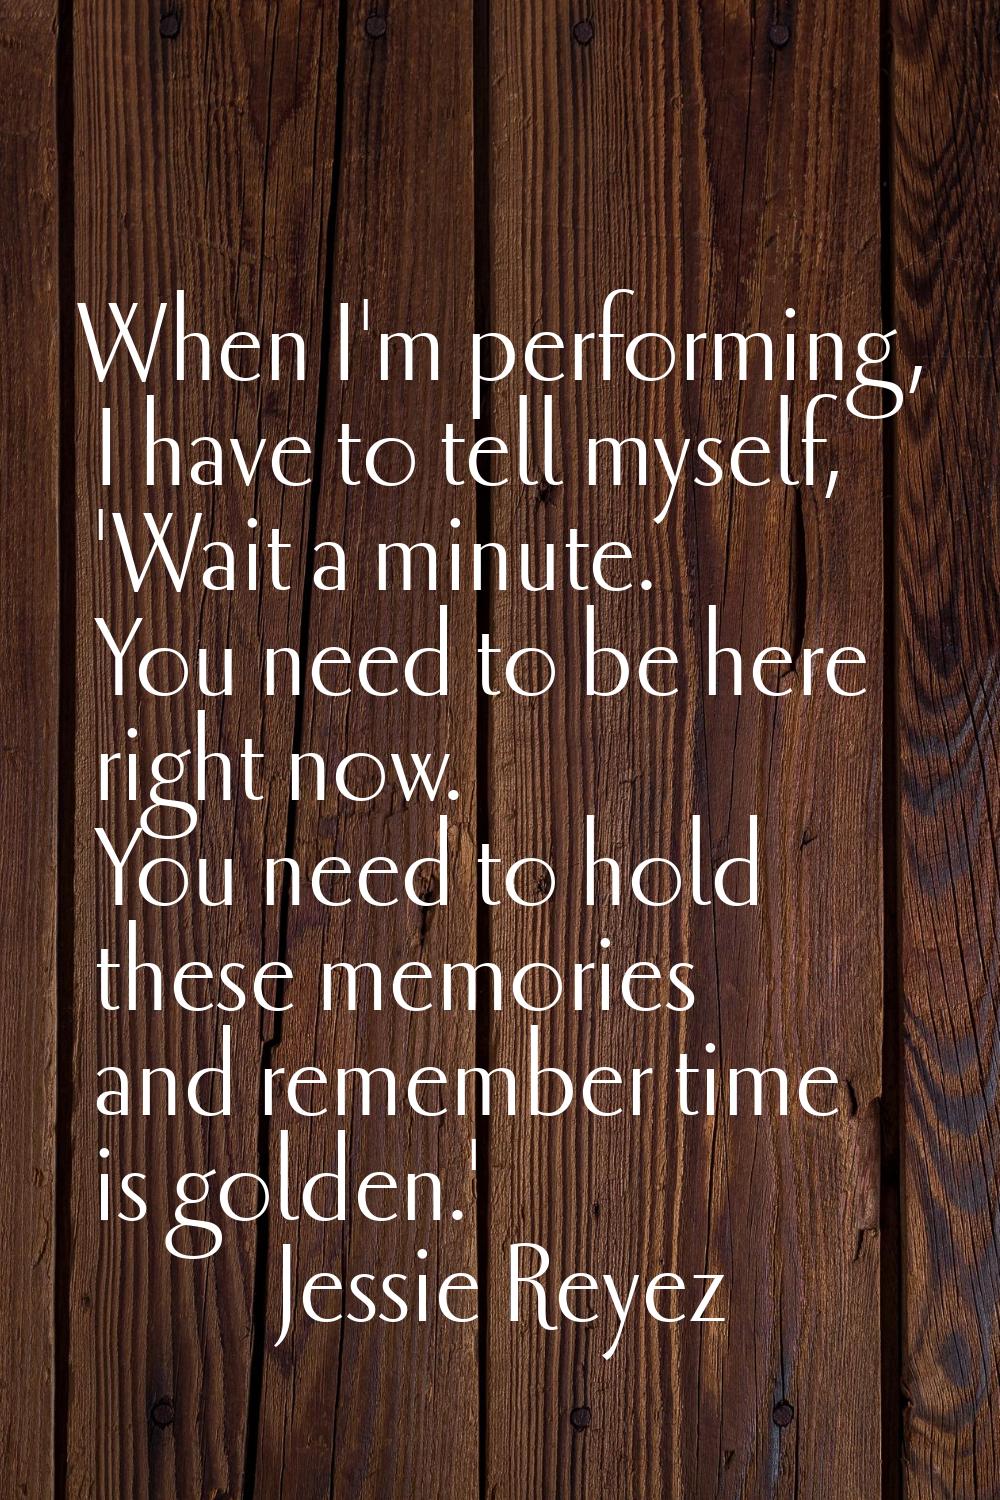 When I'm performing, I have to tell myself, 'Wait a minute. You need to be here right now. You need